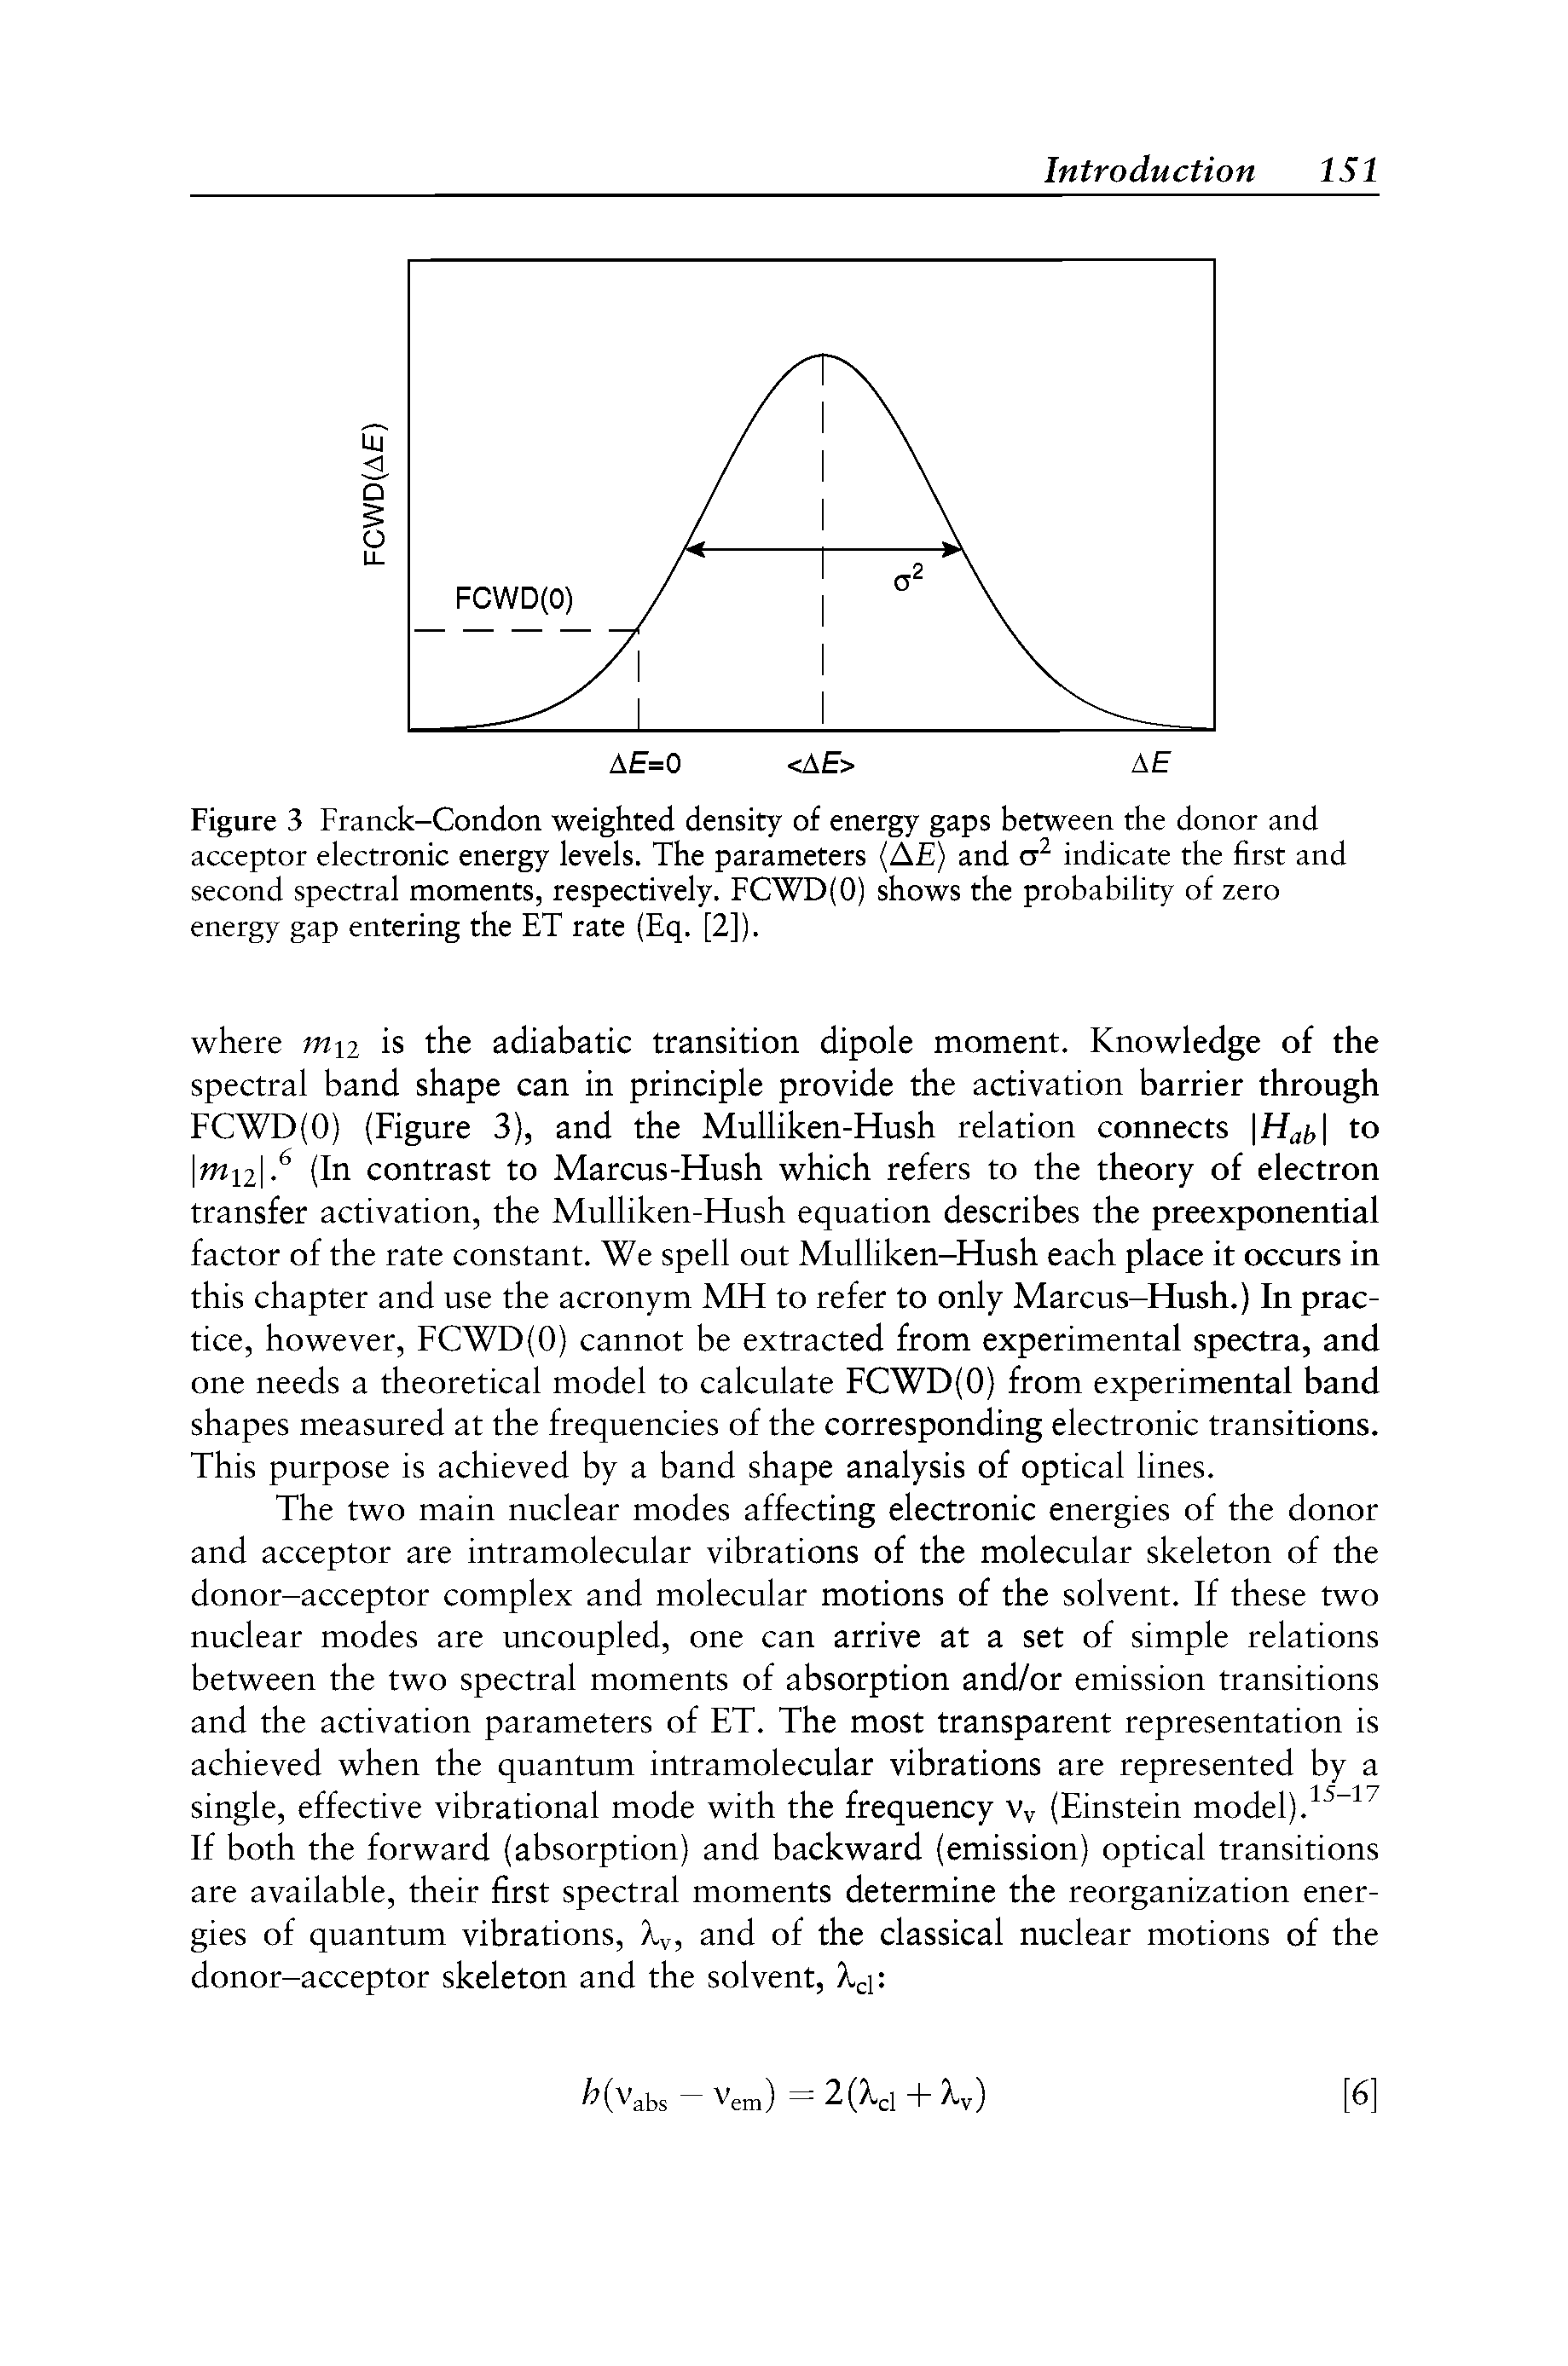 Figure 3 Franck-Condon weighted density of energy gaps between the donor and acceptor electronic energy levels. The parameters (A ) and indicate the first and second spectral moments, respectively. FCWD(O) shows the probability of zero energy gap entering the ET rate (Eq. [2]).